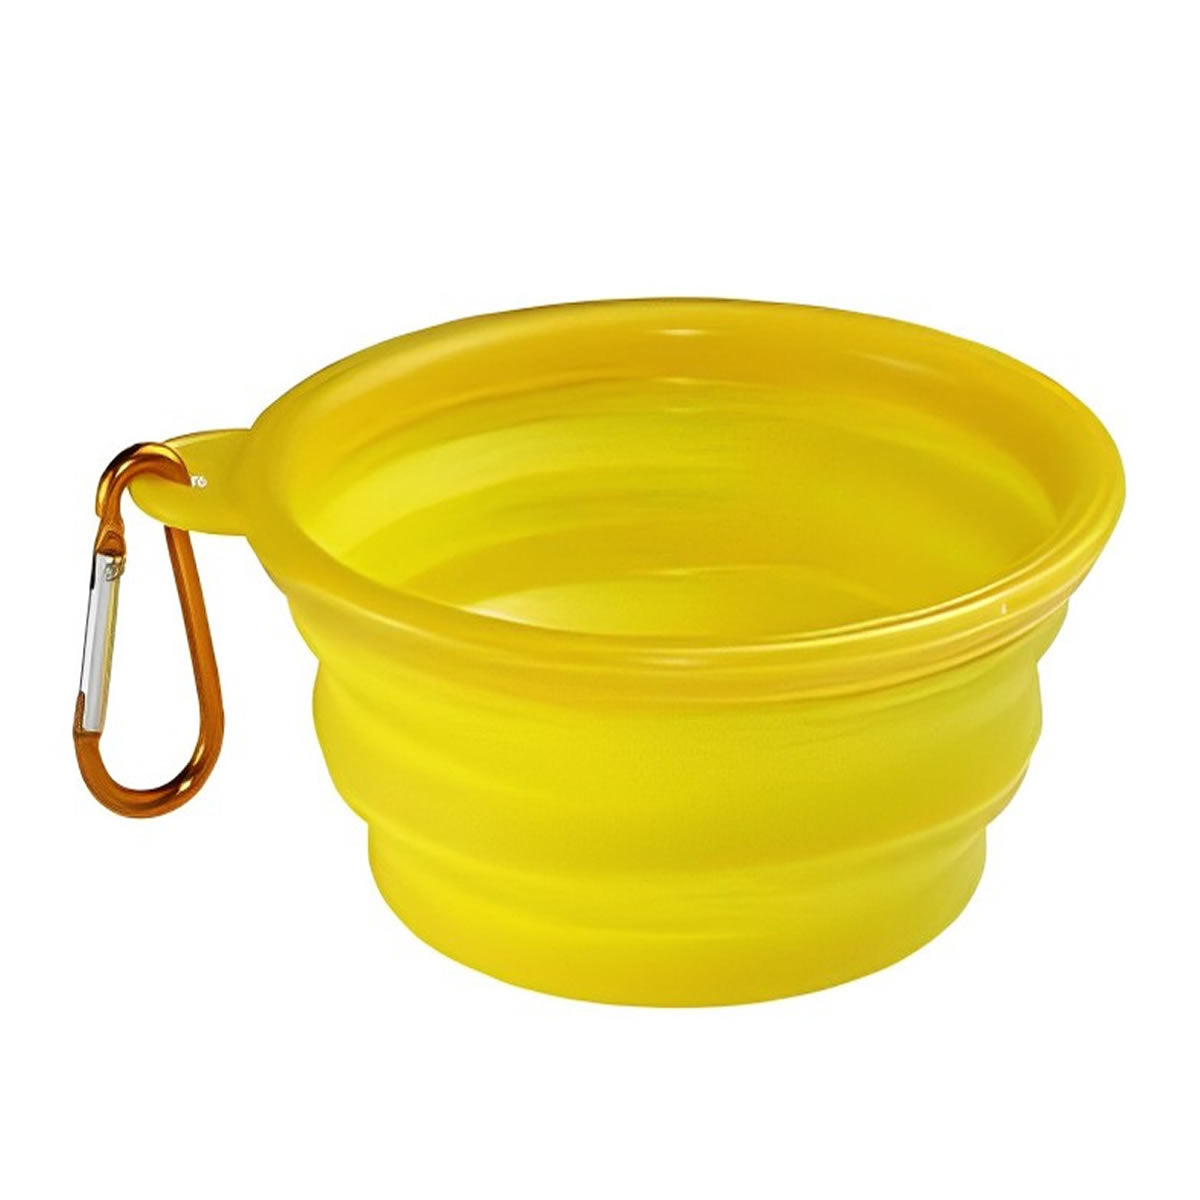 SL-32-Collapsible Silicone Dog Bowl with Carabiner